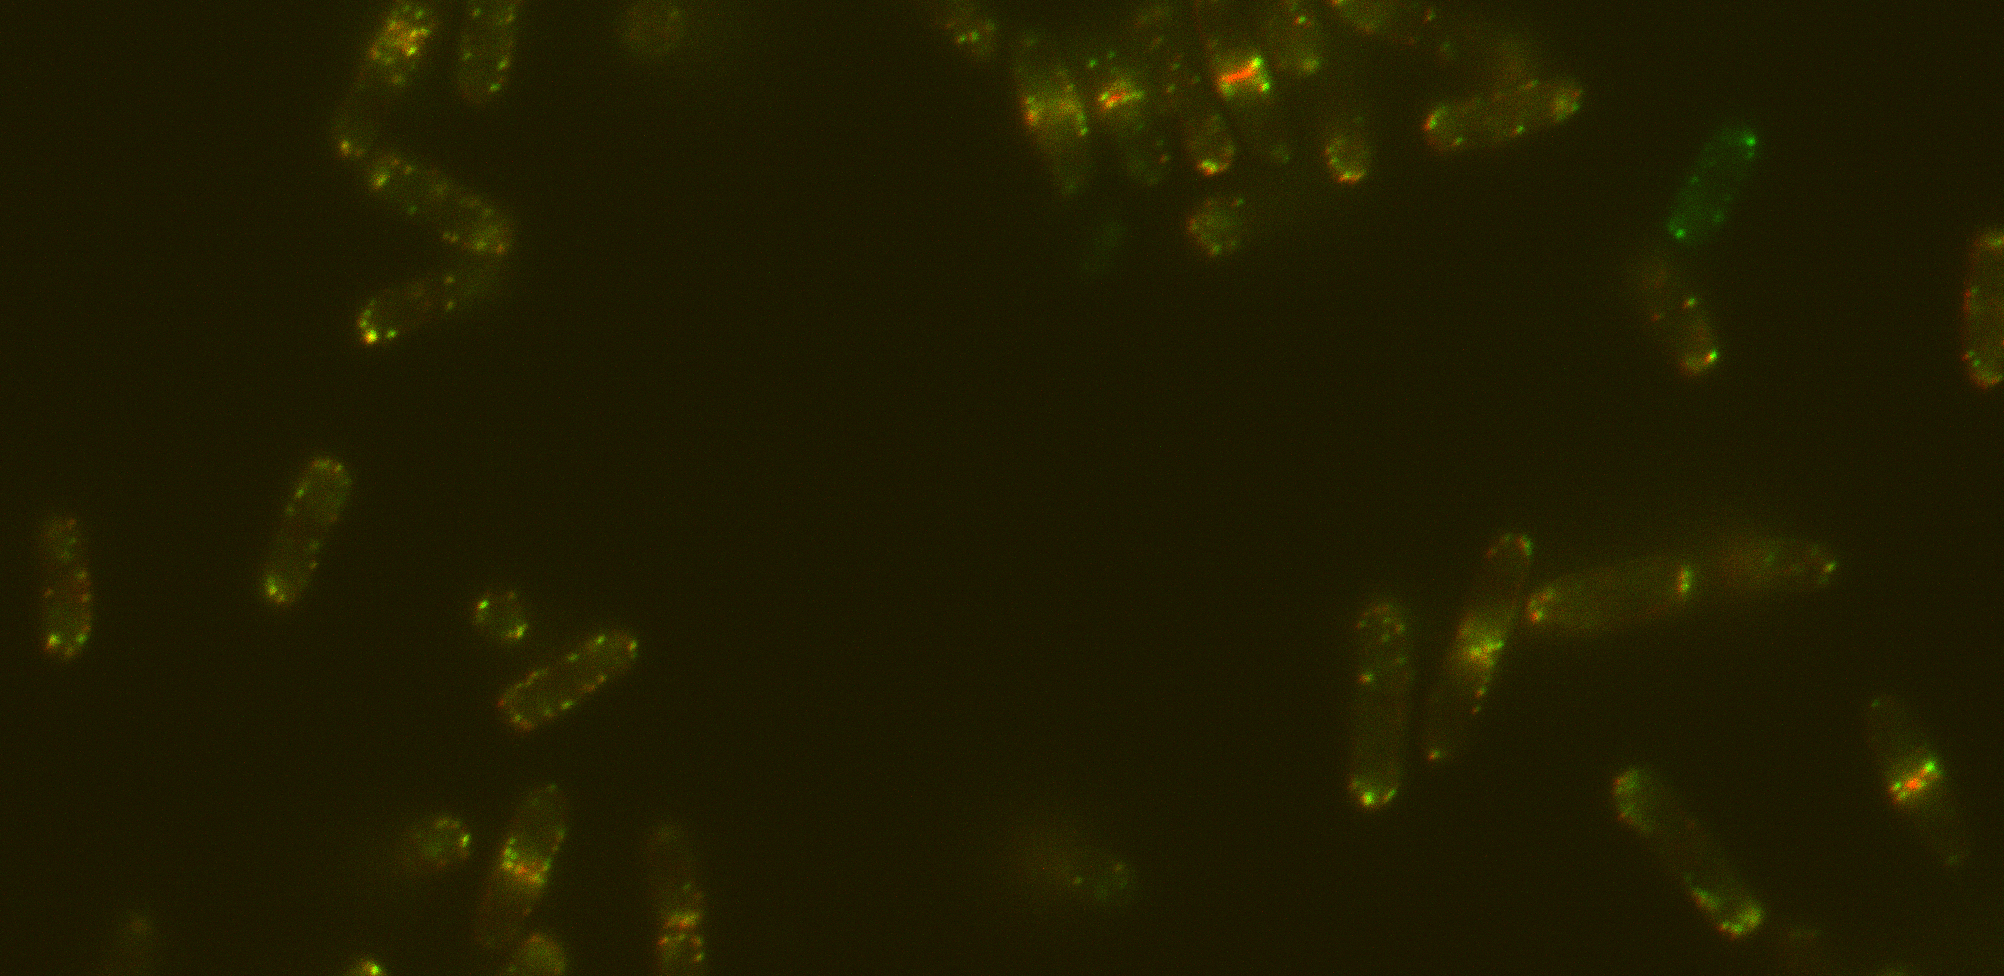 Combined image above shows the data. Majority of protein signal co-localises (yellow), with red only seen on cytokinetic ring. However due to lack of bleed through this system gives the researcher 100% confidence that the colocalisation is real.